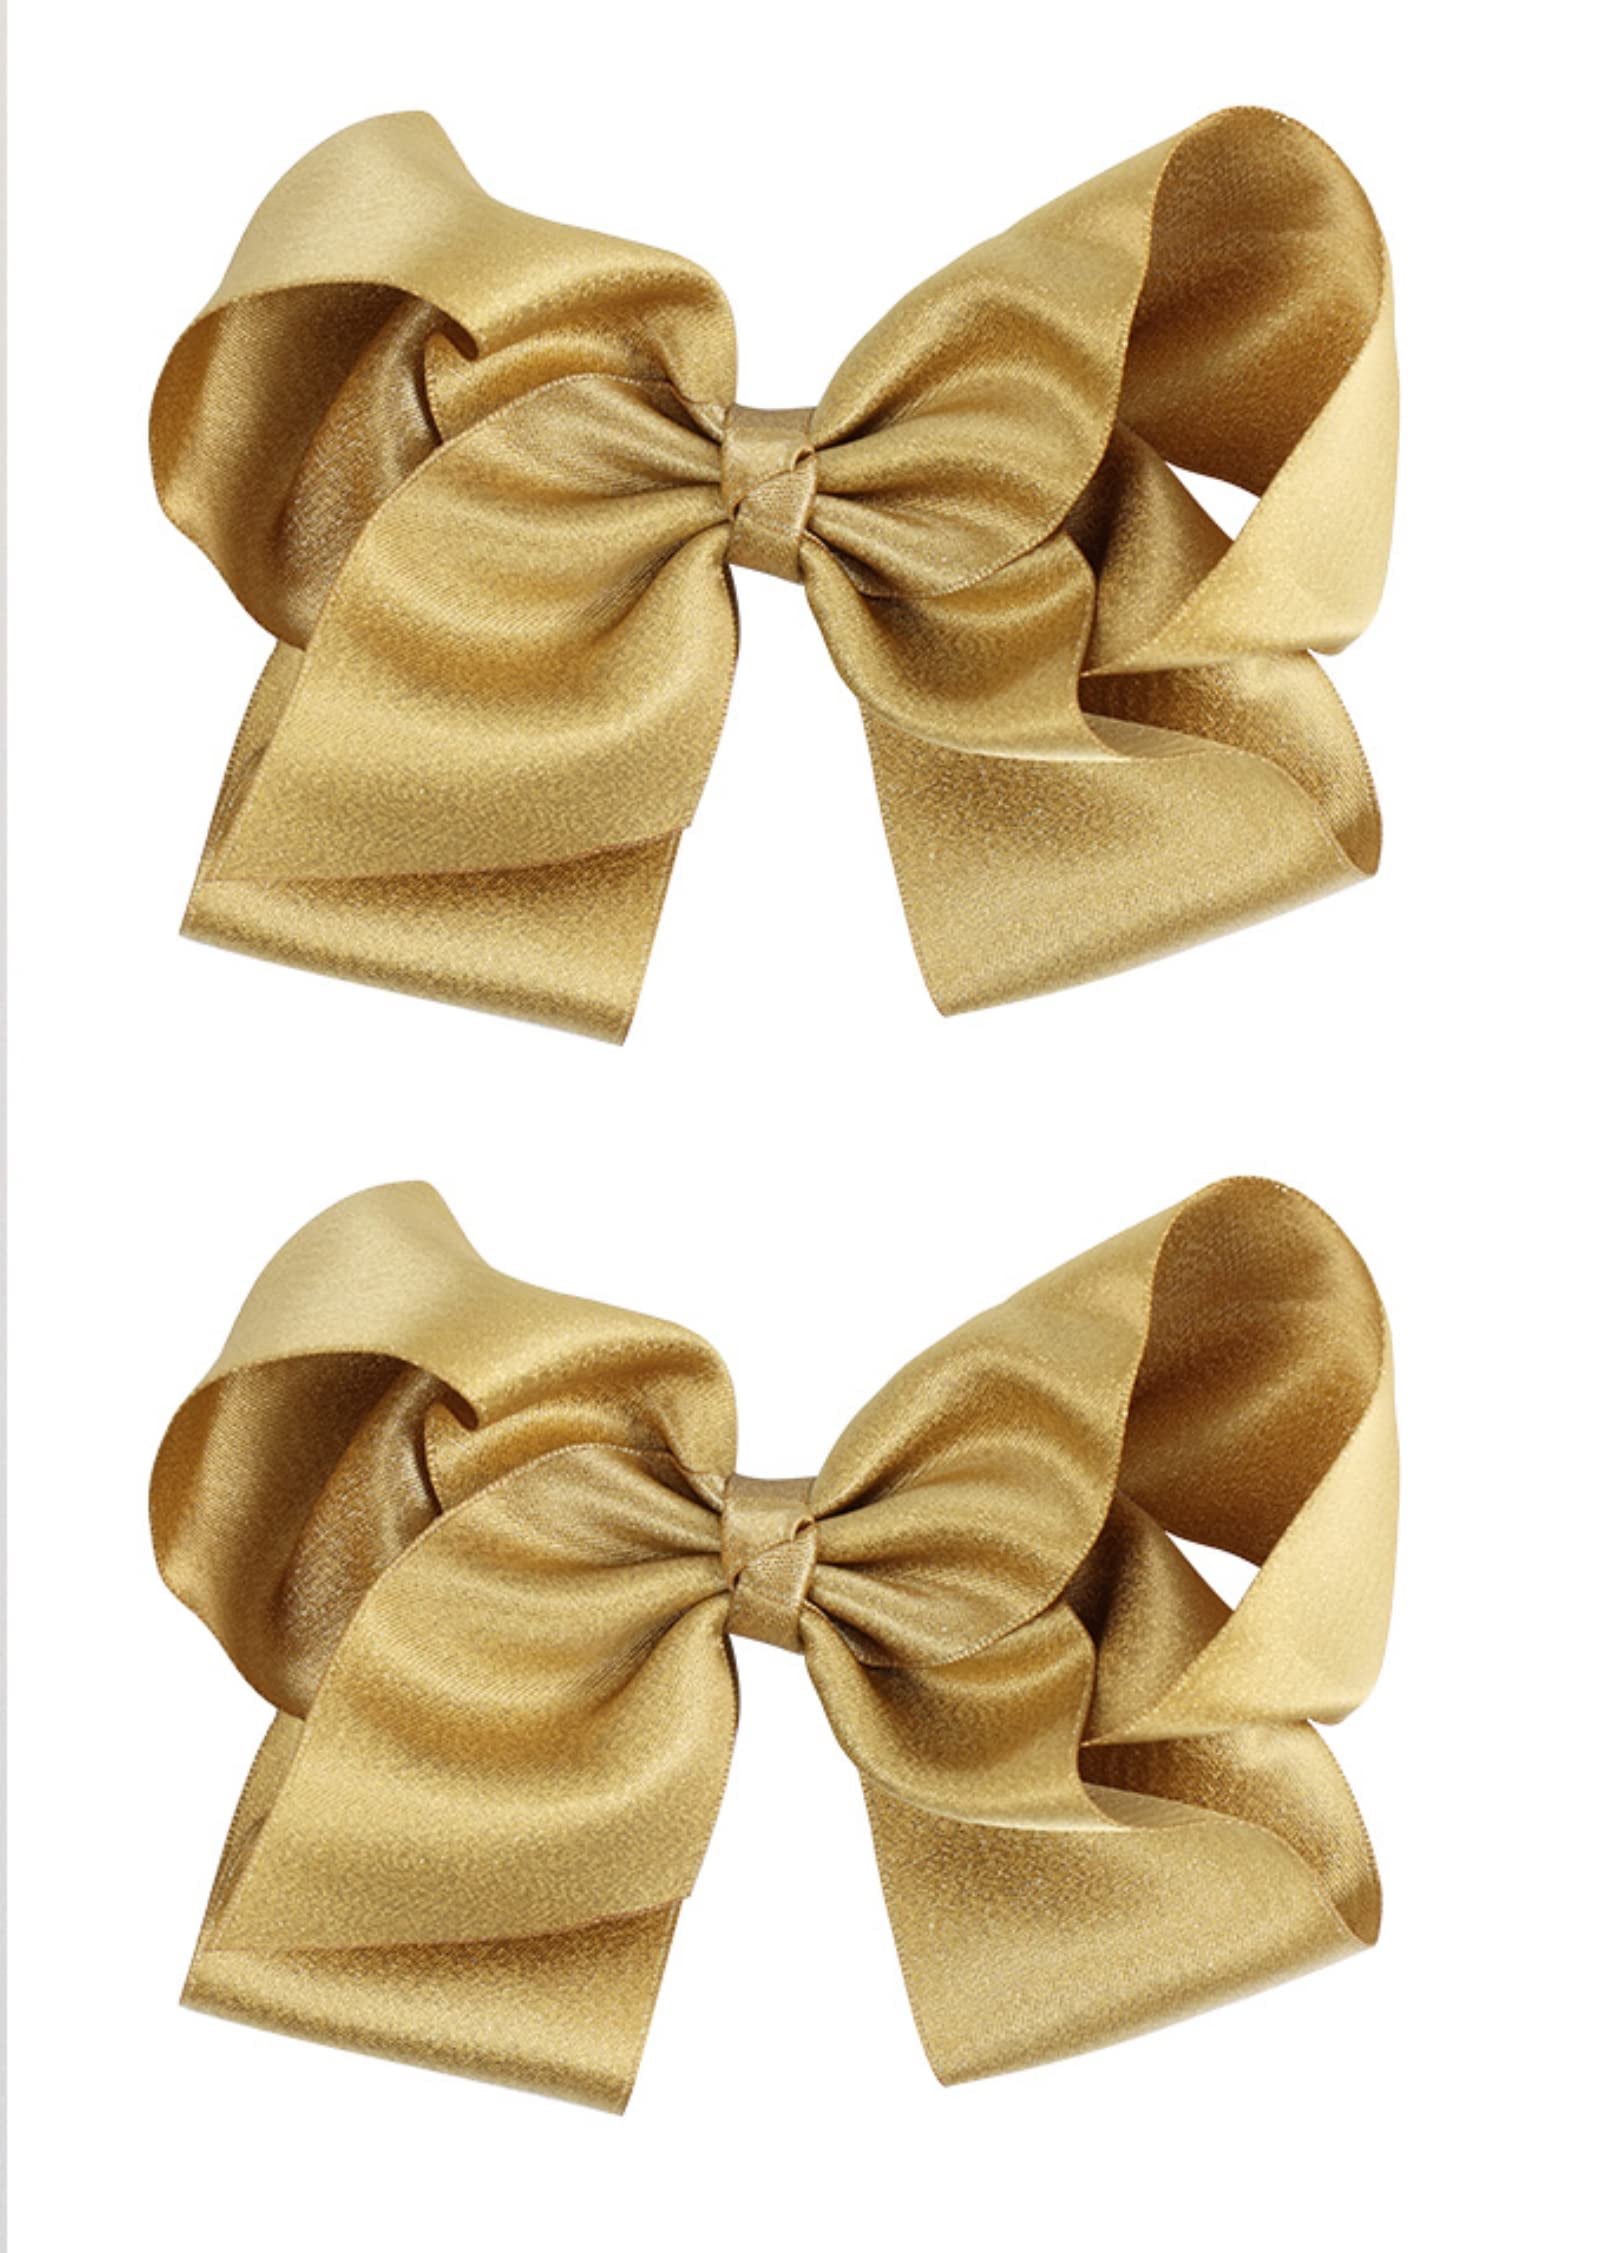 Just in! Raffia 4 Bows $3.99 for 12 pieces!  Fabric hair bows, Ribbon  bows, Hair bows for sale